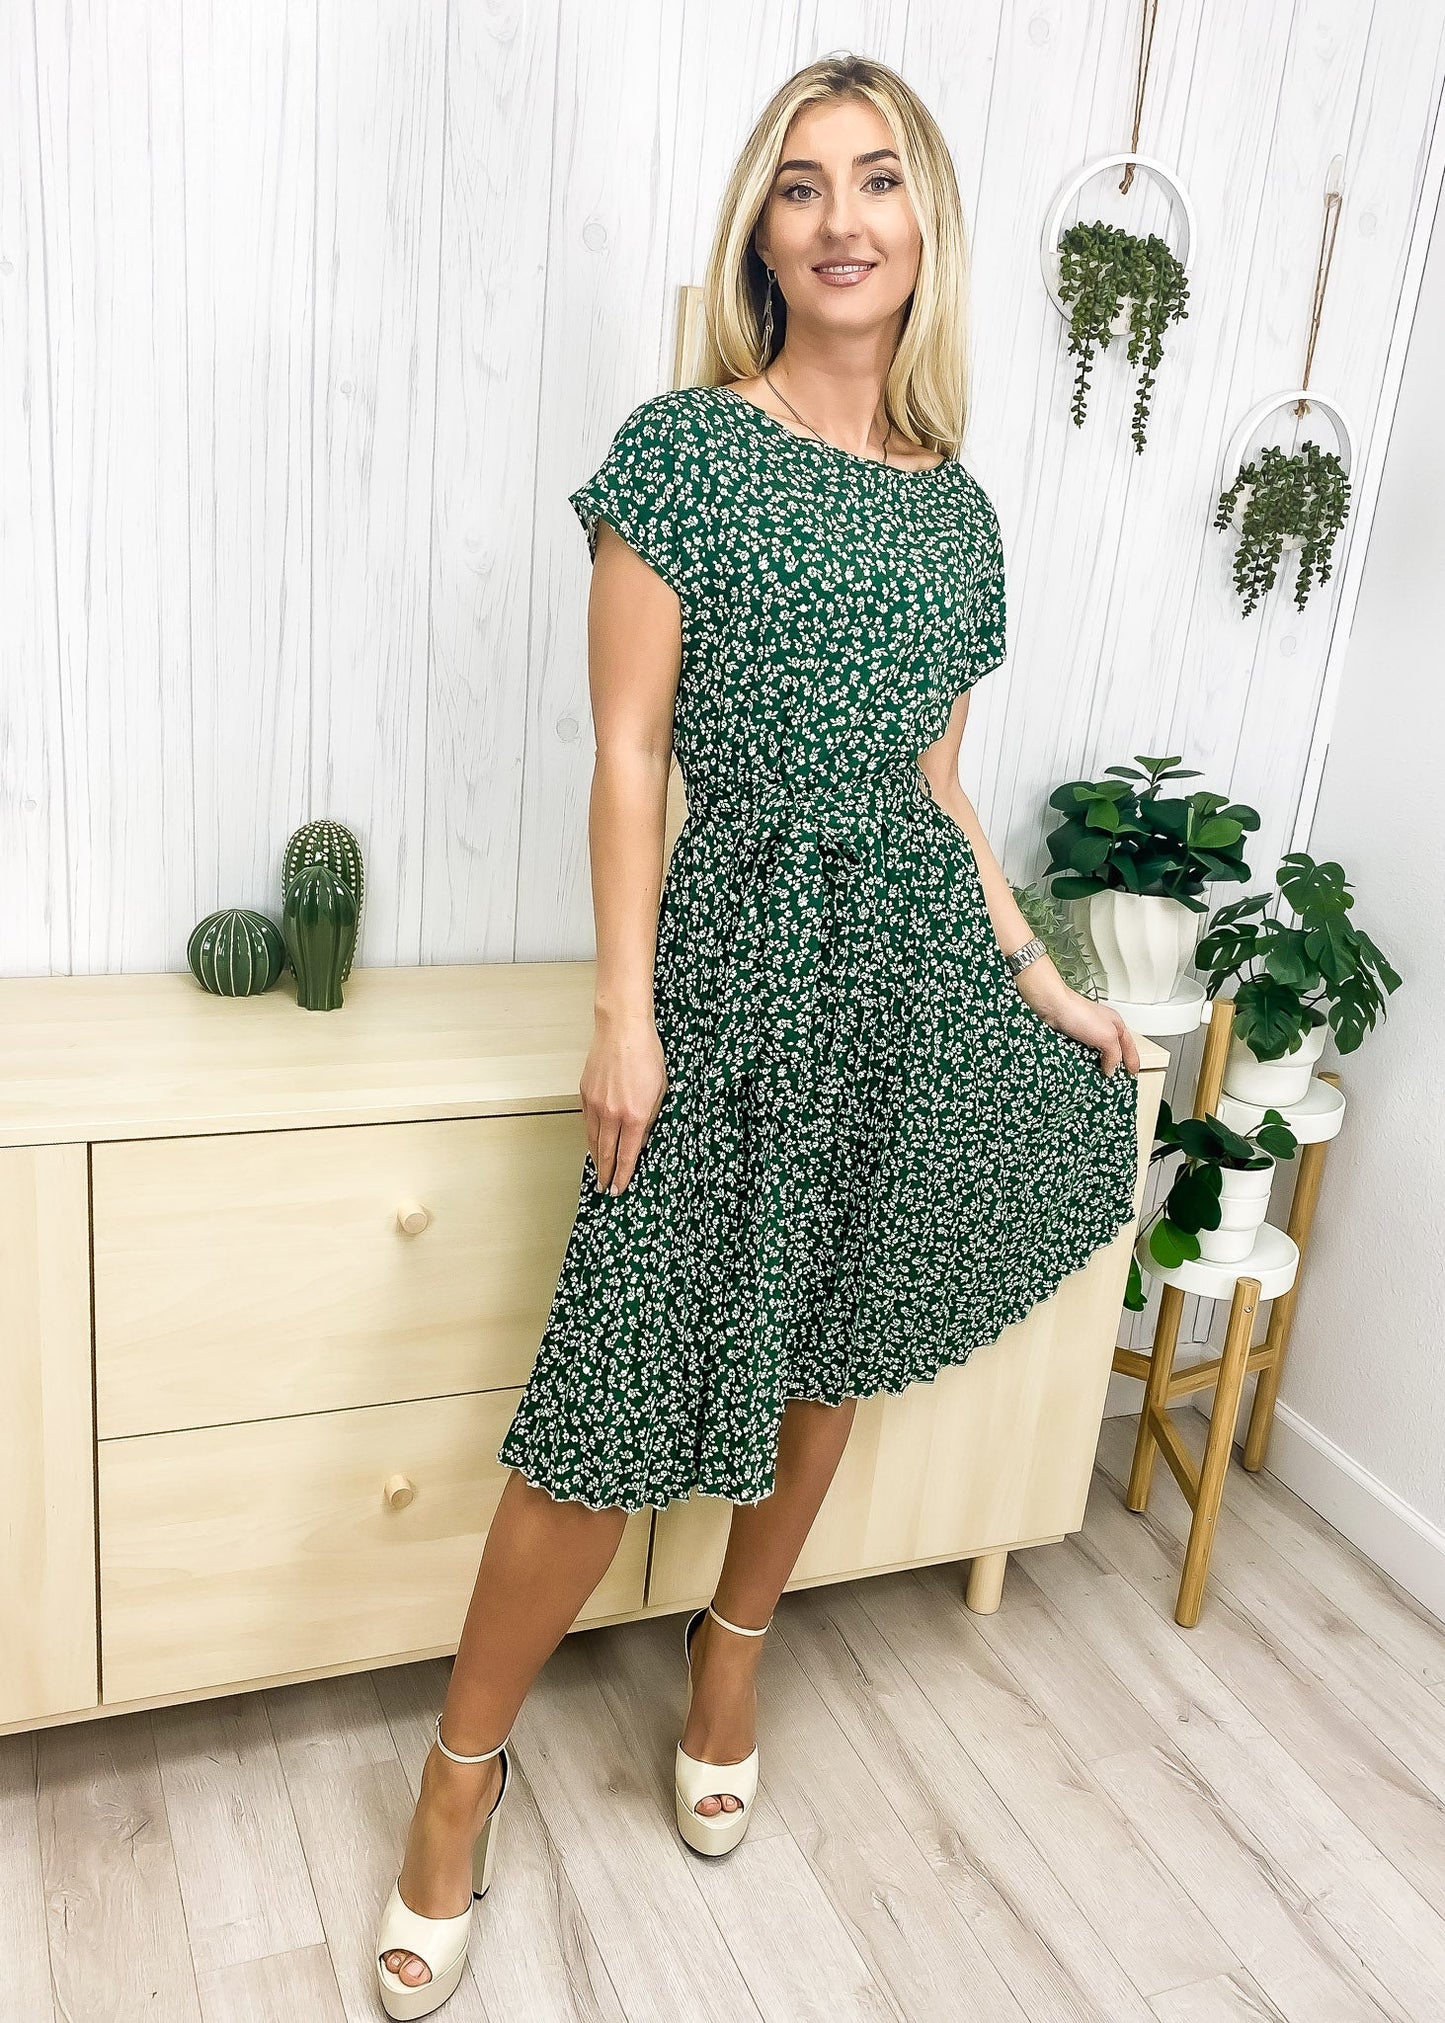 Ditsy Floral Print Pleated Dress